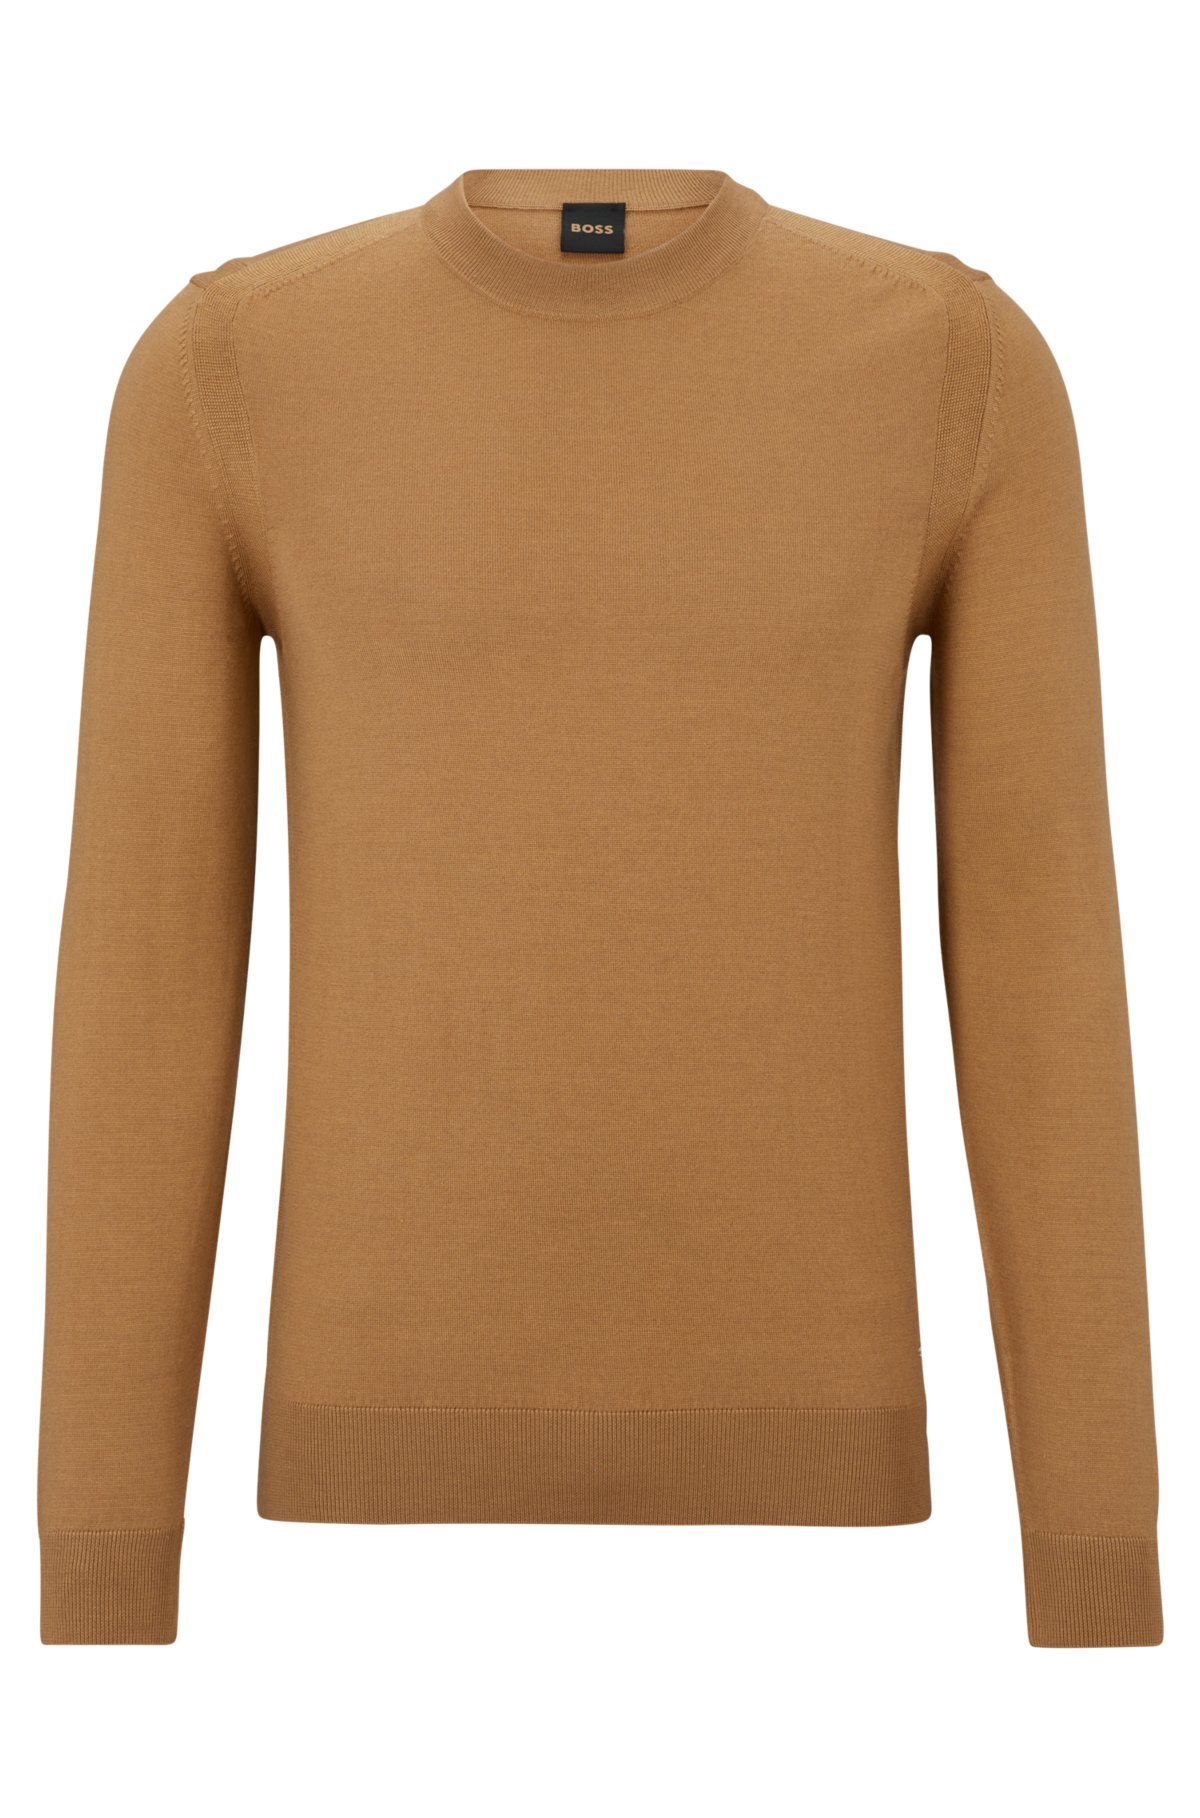 BOSS - Regular-fit sweater in wool, silk and cashmere